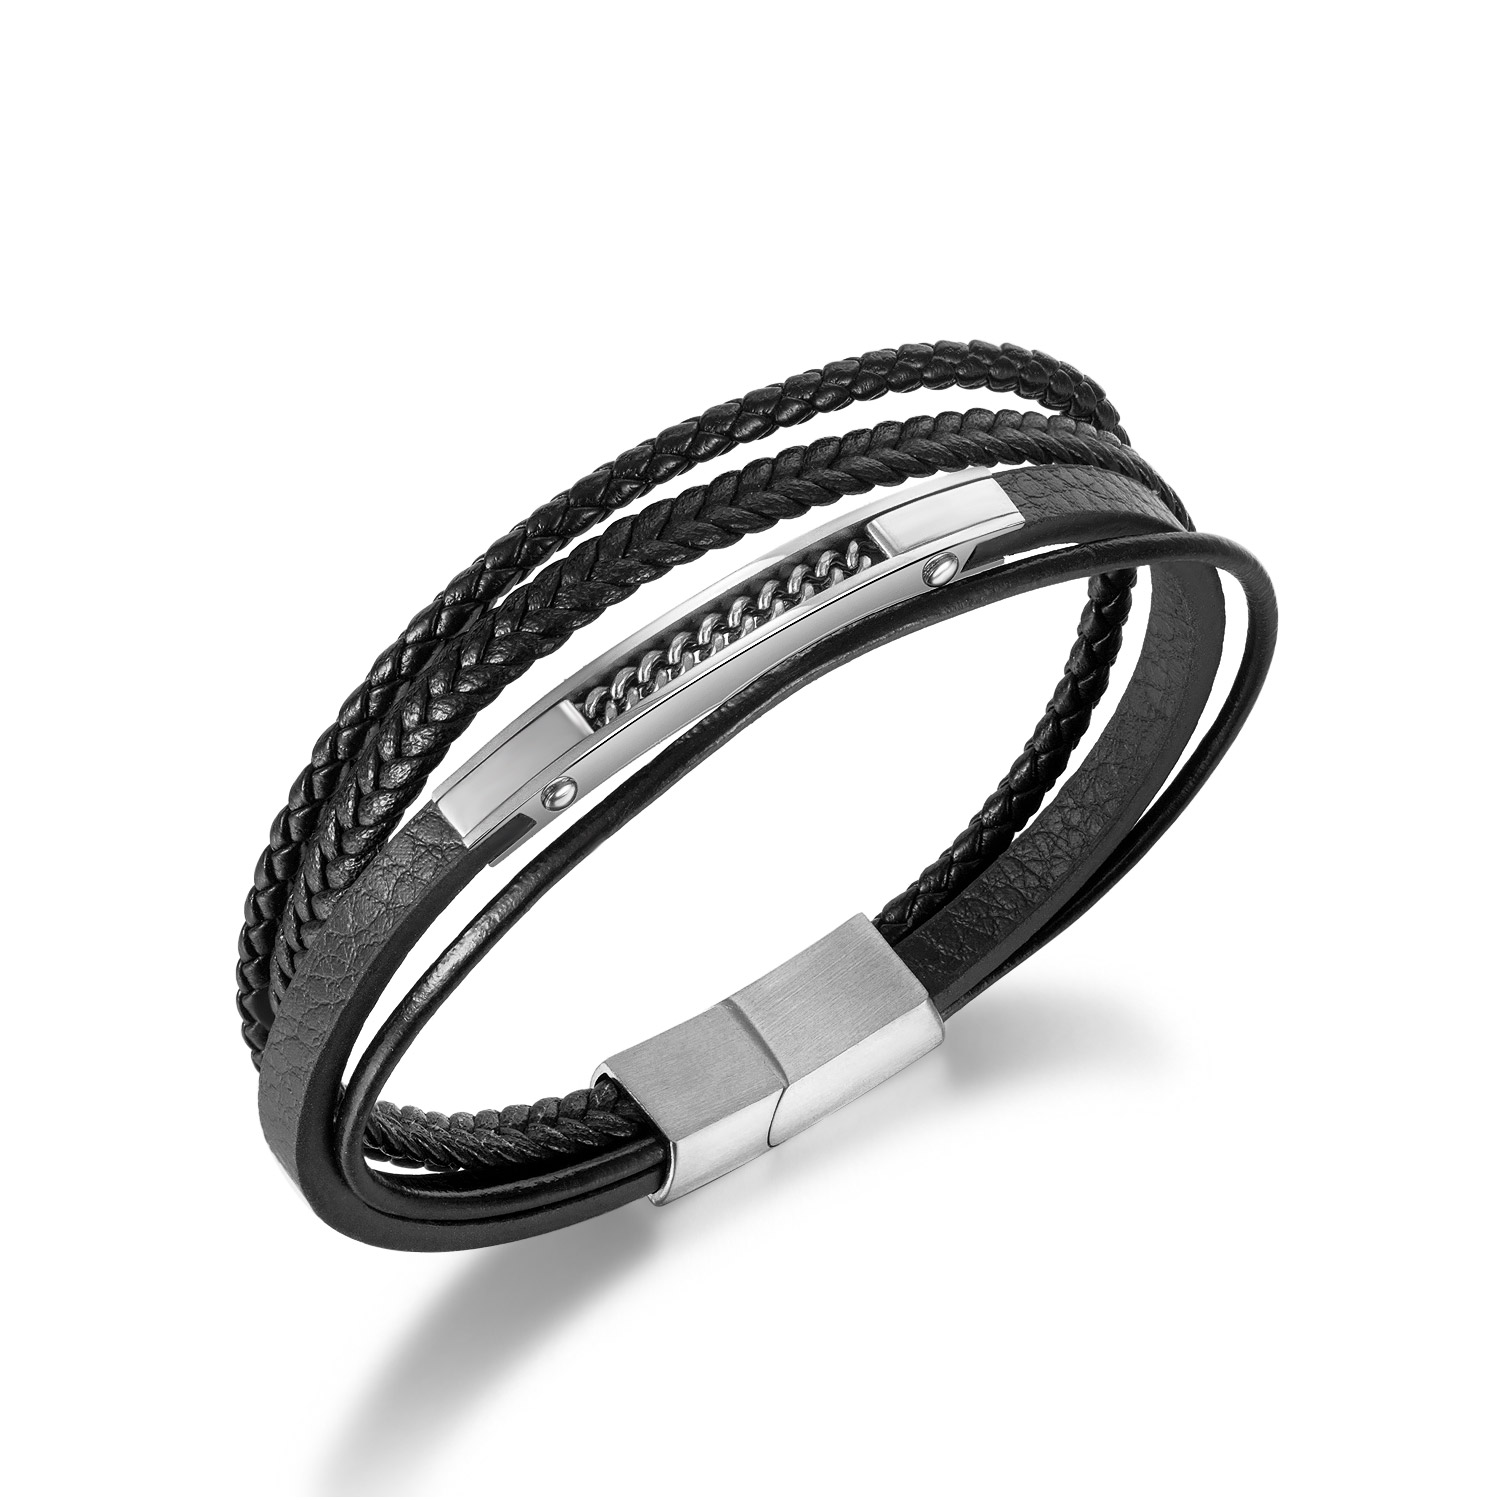 Mens Leather Stainless Steel Bracelets